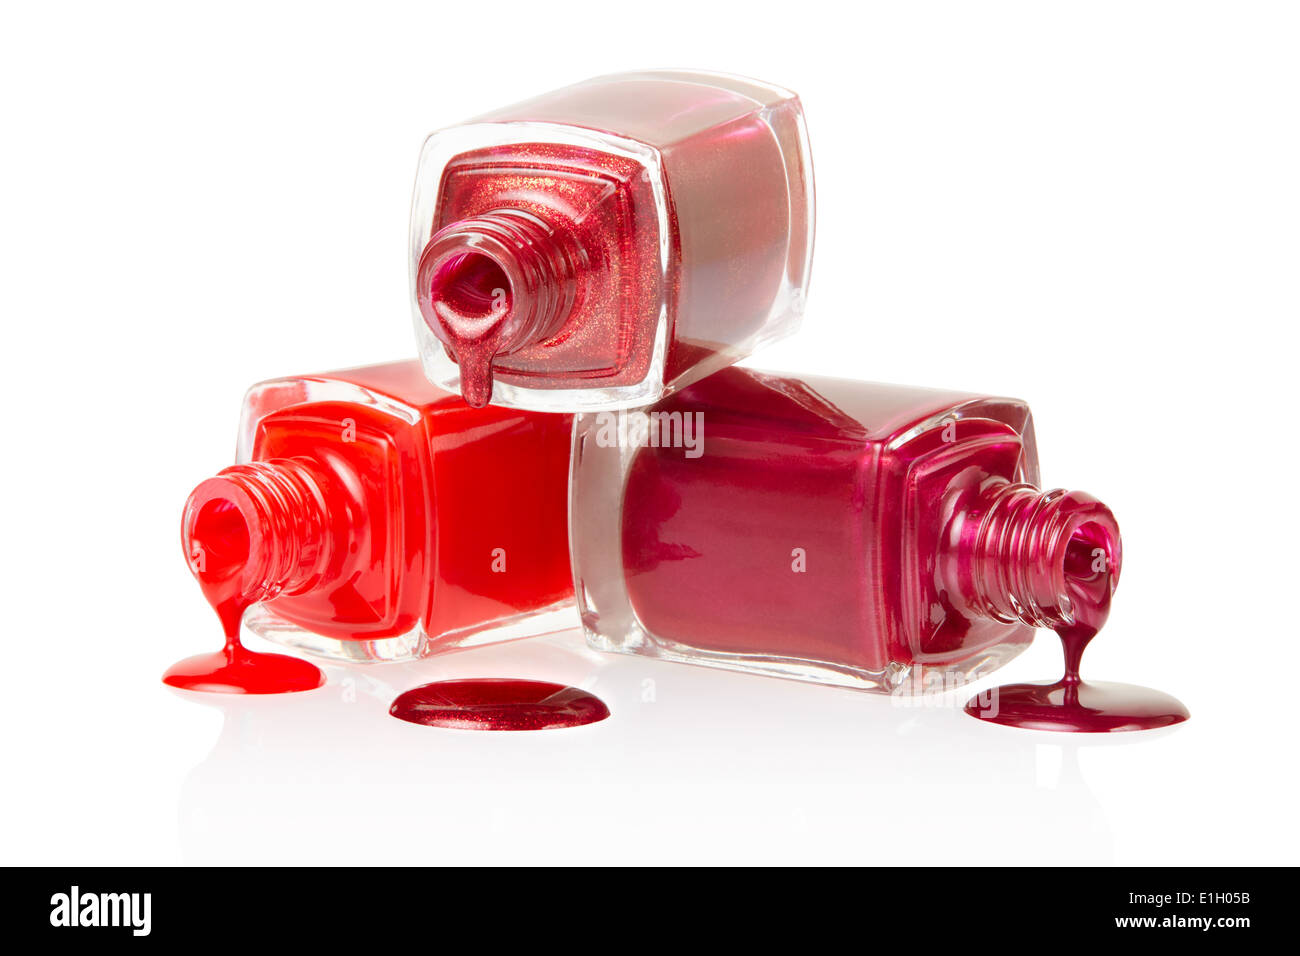 Red nail polish spilled Stock Photo